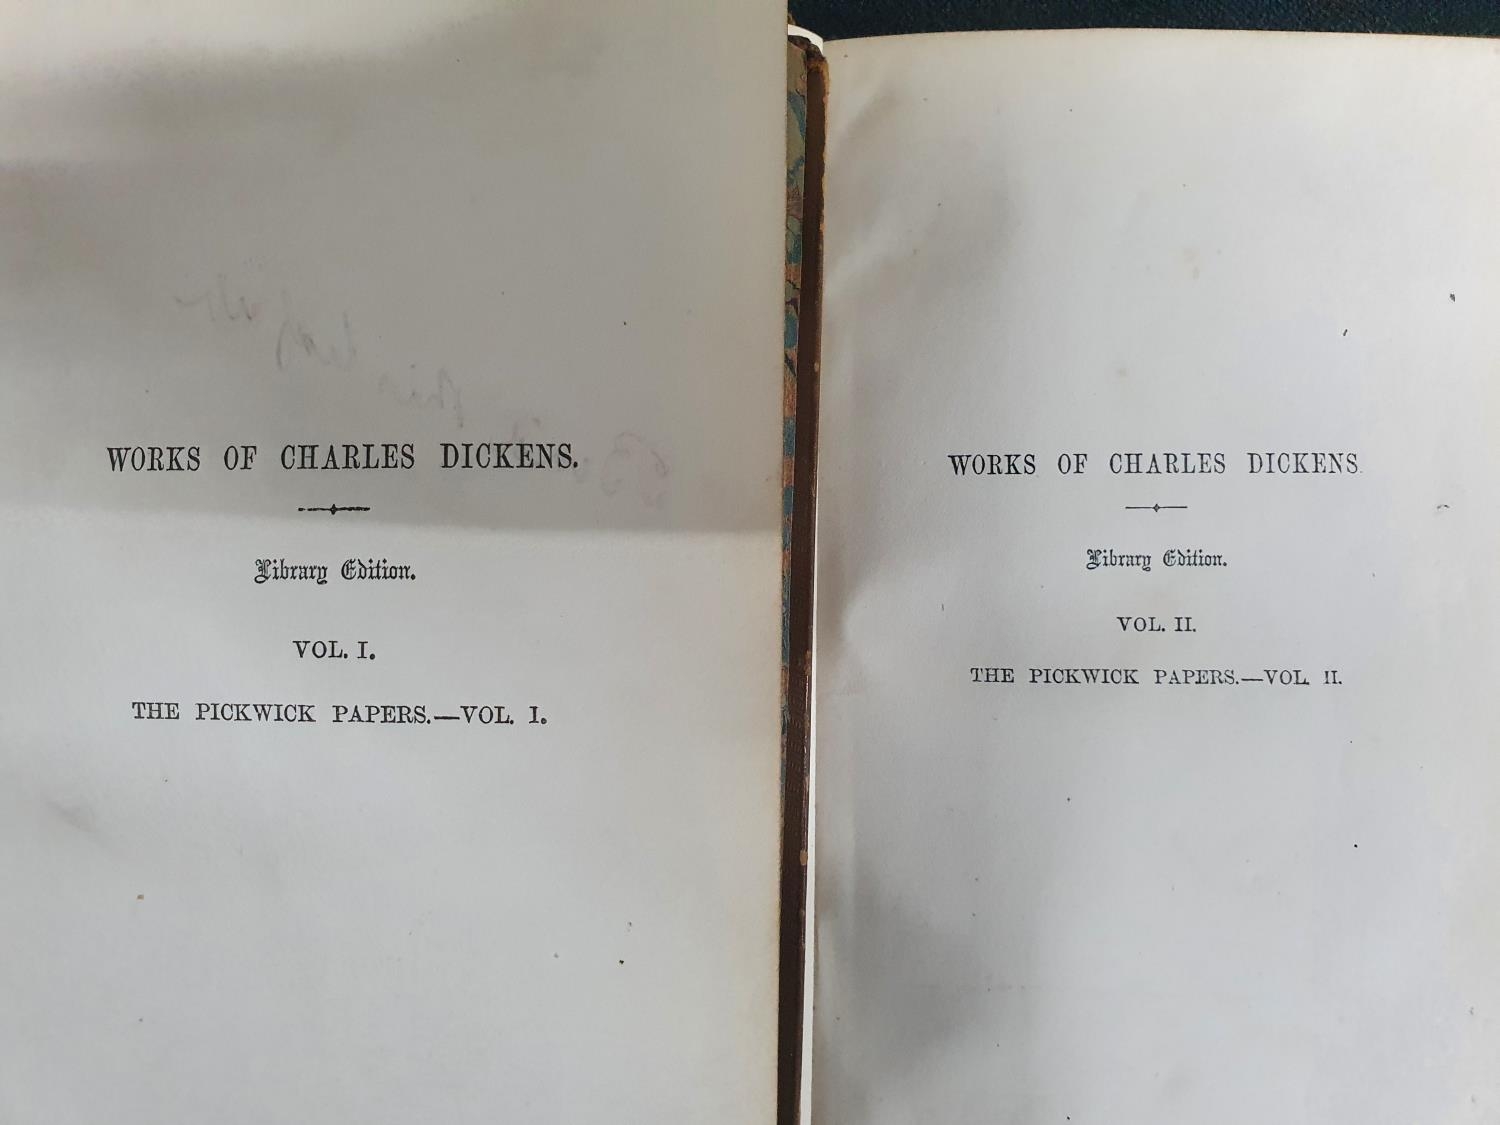 The Posthumus papers of the Pickwick club volumes I & II, 1866 Library edition by Charles Dickens - Image 5 of 9